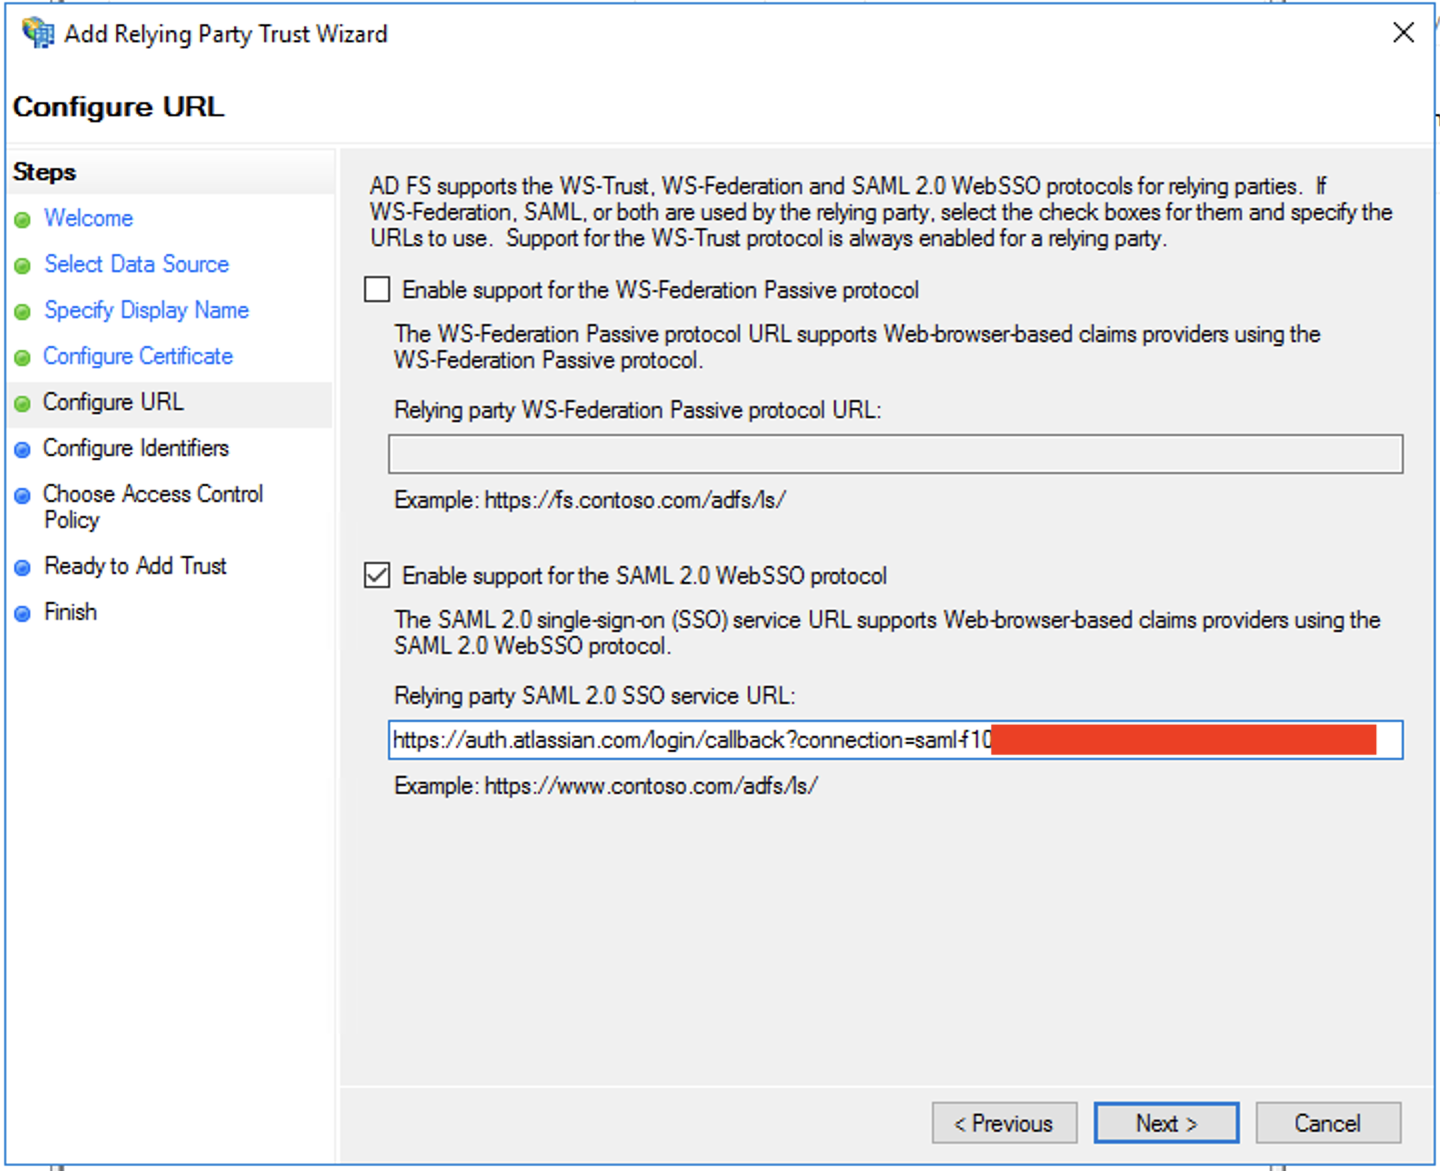 Add relying party trust wizard, configure URL step